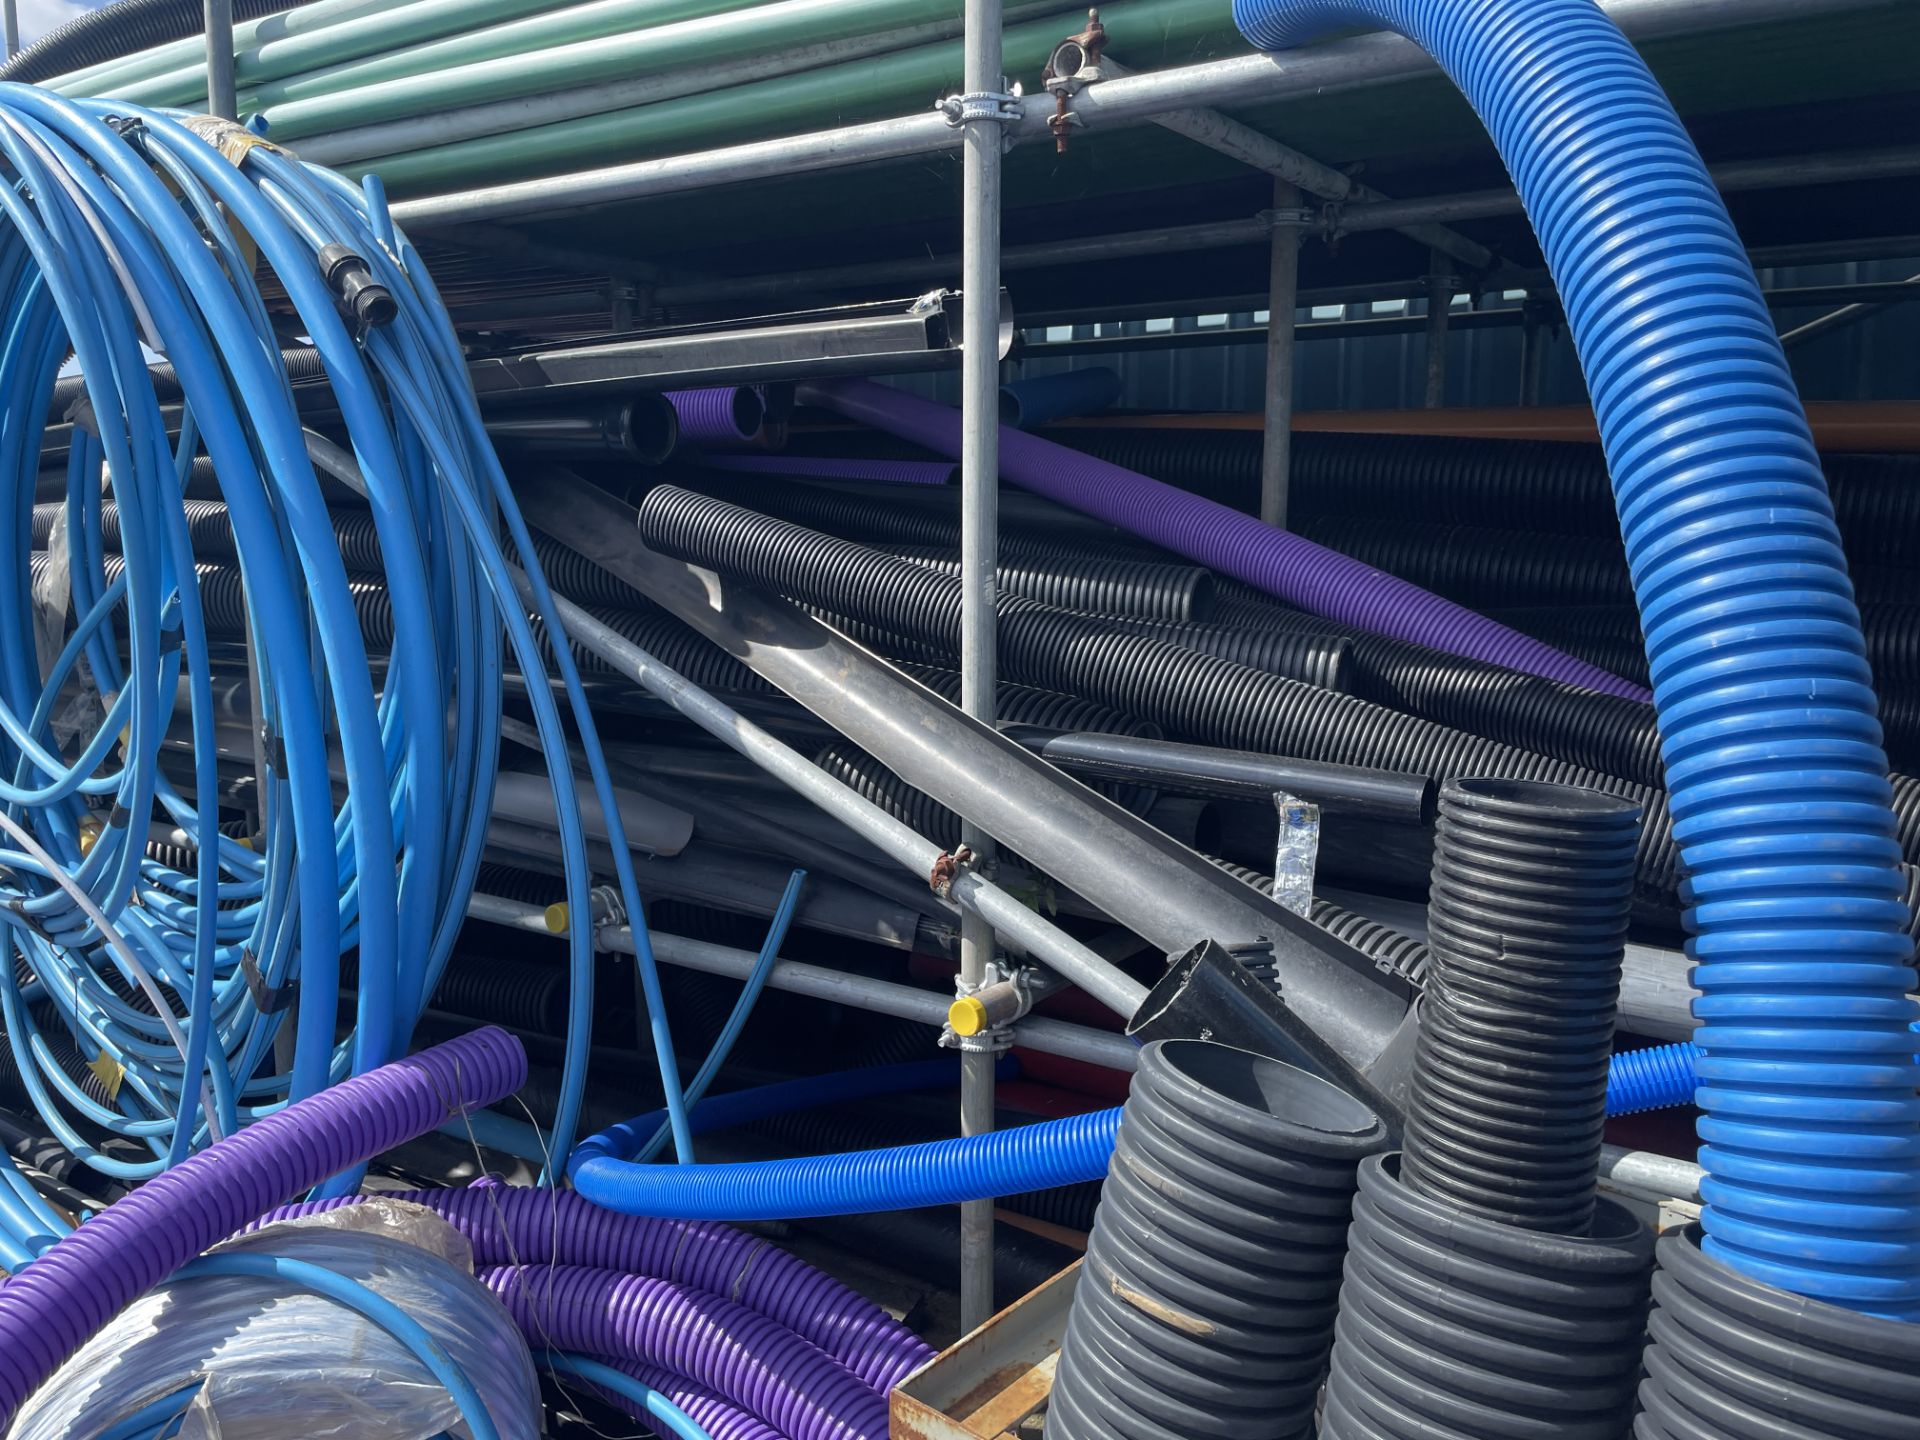 Mainly Flexible Piping, in four compartments of rack and at end Please read the following - Image 2 of 2